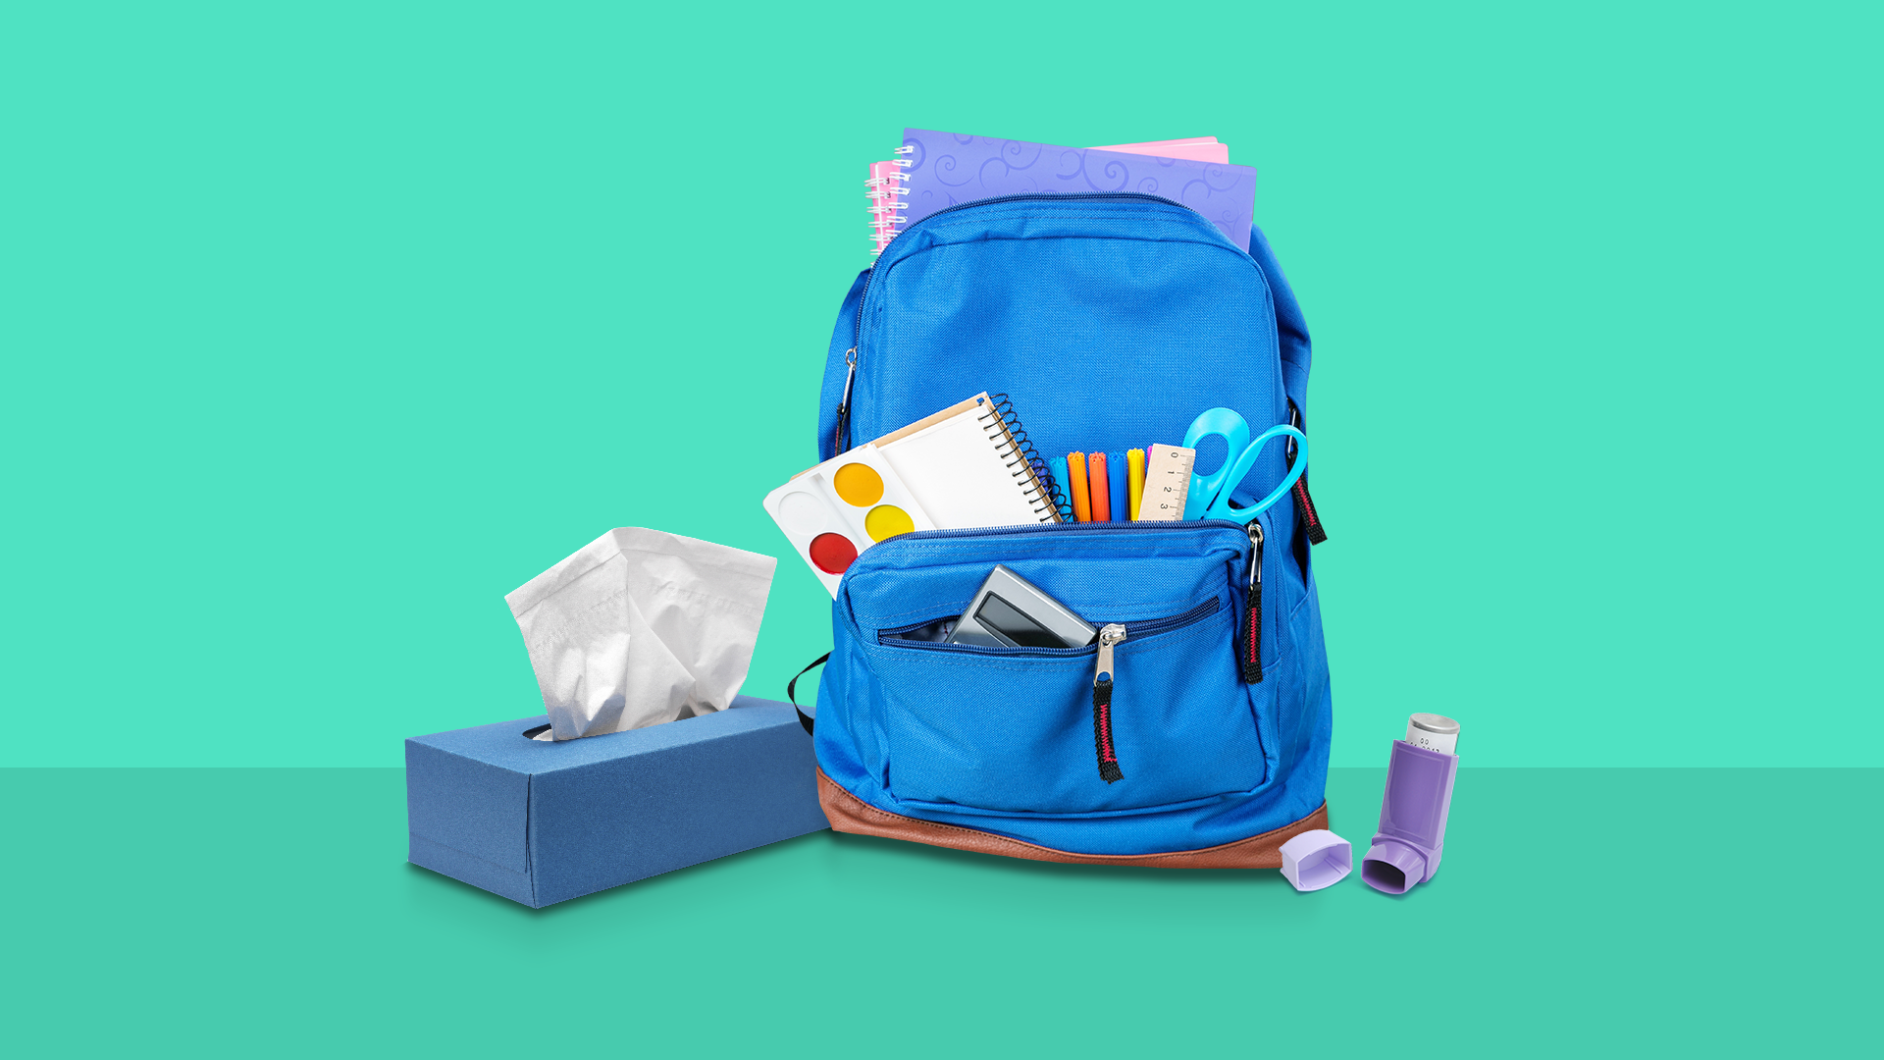 A backpack and inhaler represent an asthma action plan at school